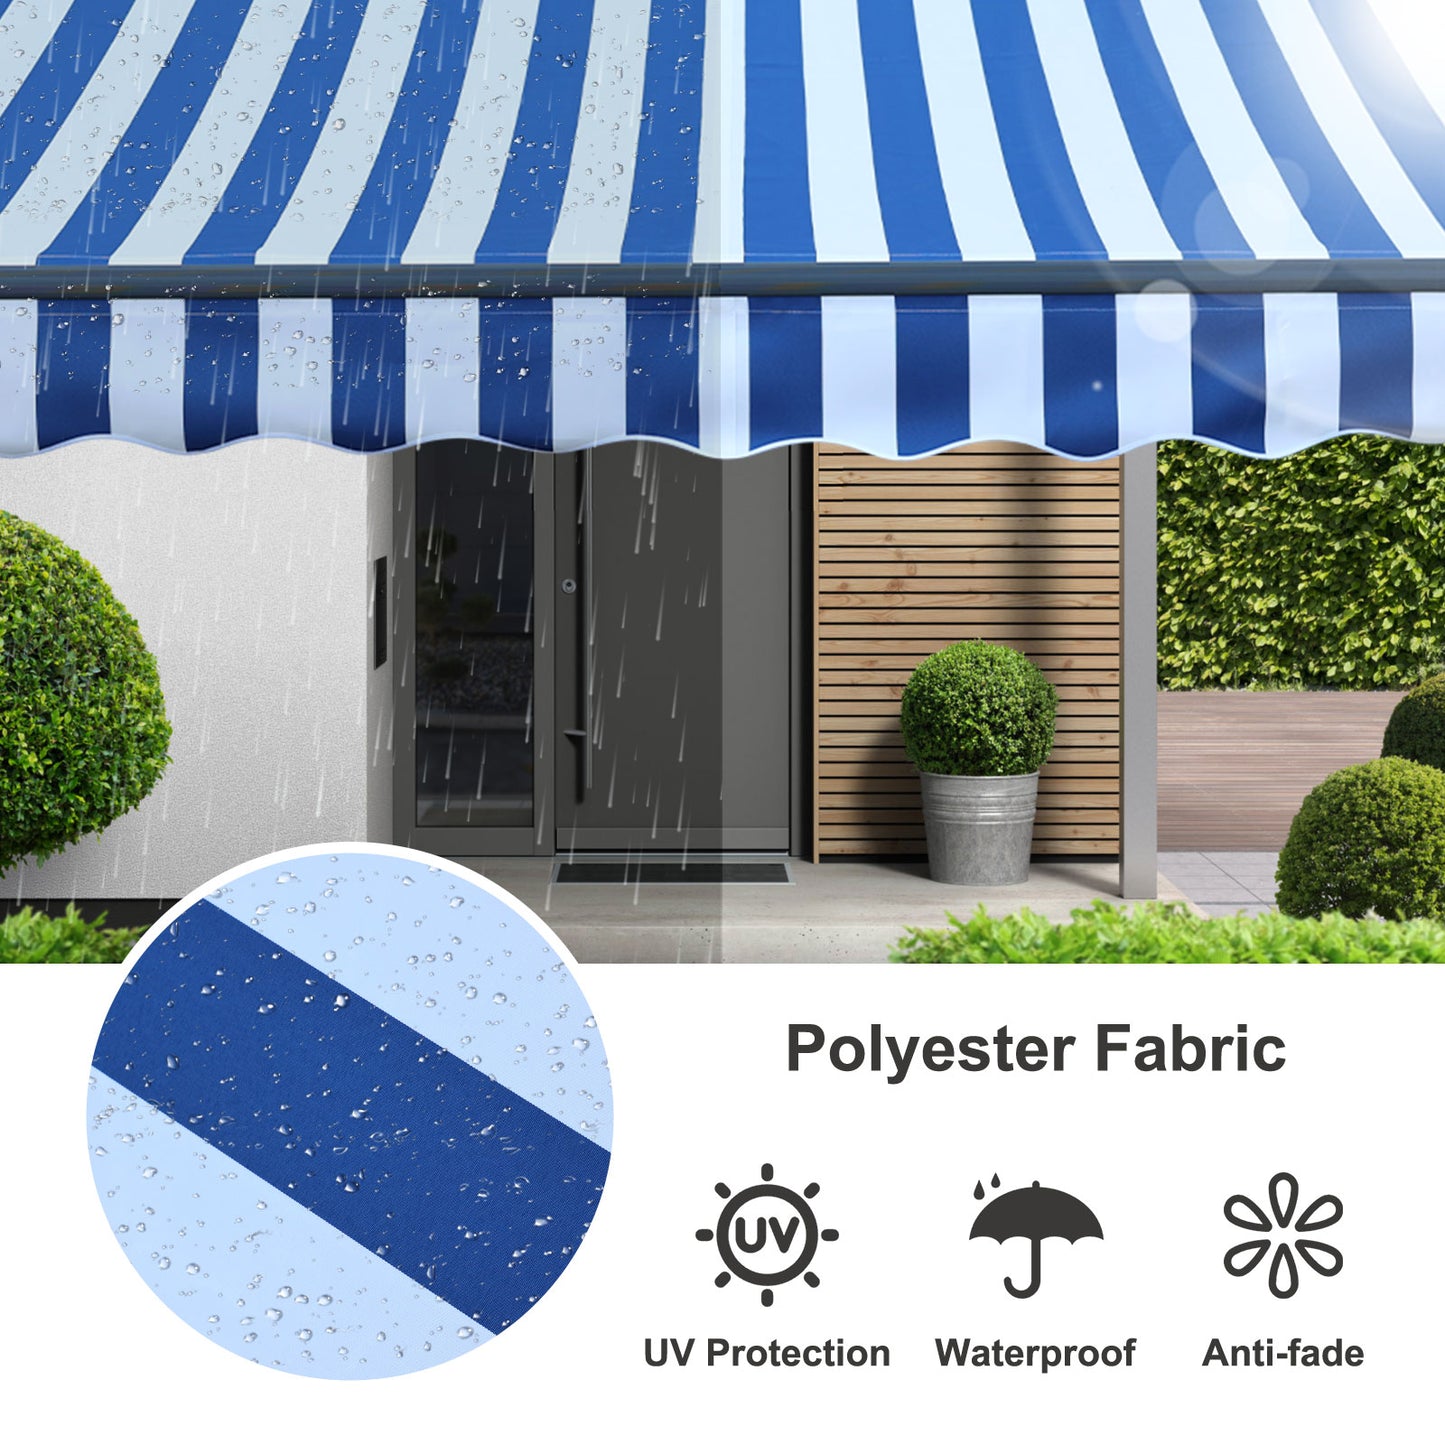 12'x  8' x 5' Retractable Window Awning Sunshade Shelter,Polyester Fabric,with Brackets and Two Wall Bases